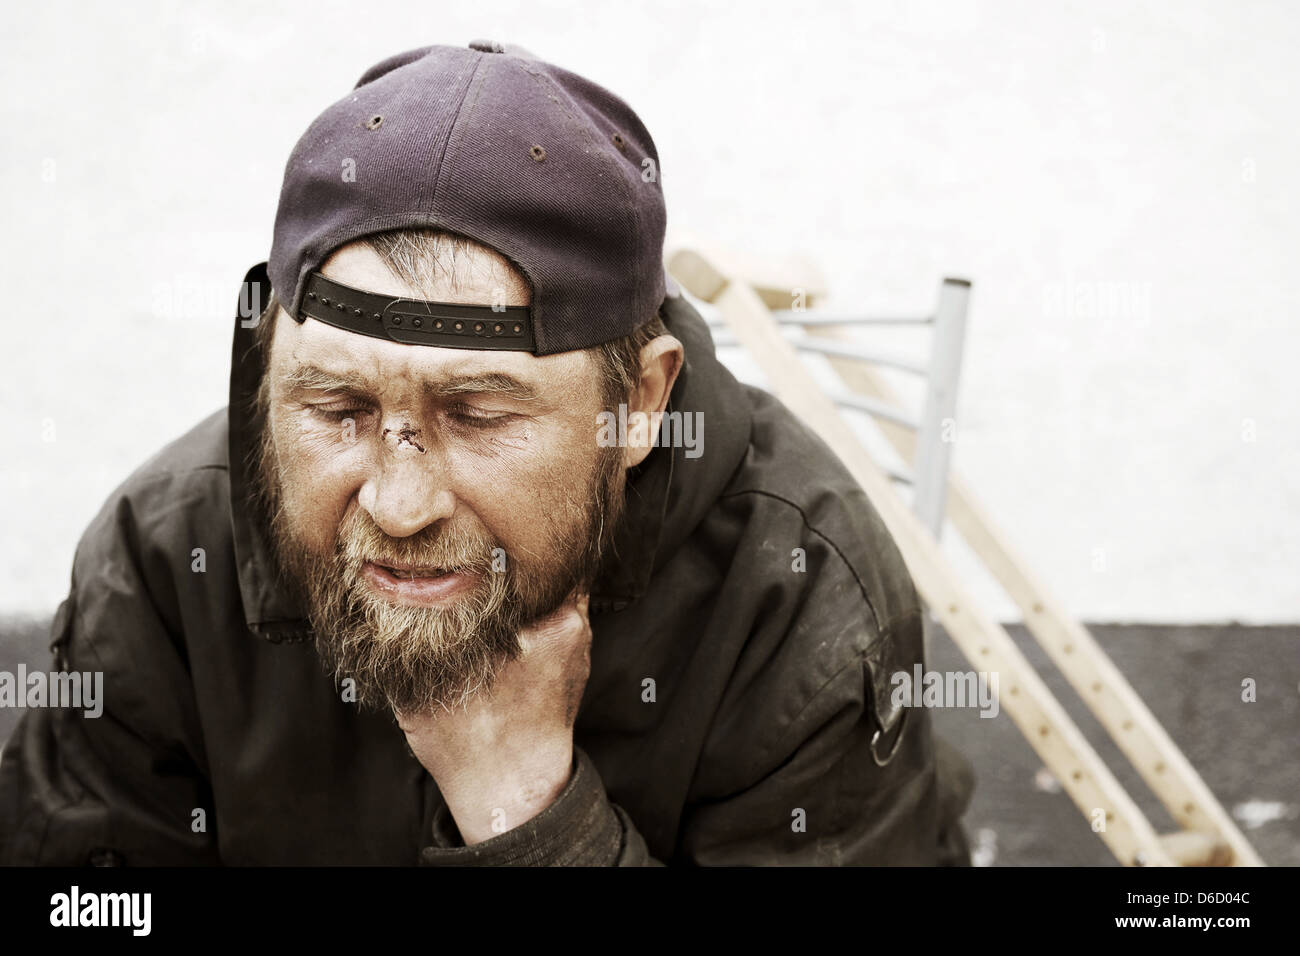 Disabled homeless man Stock Photo